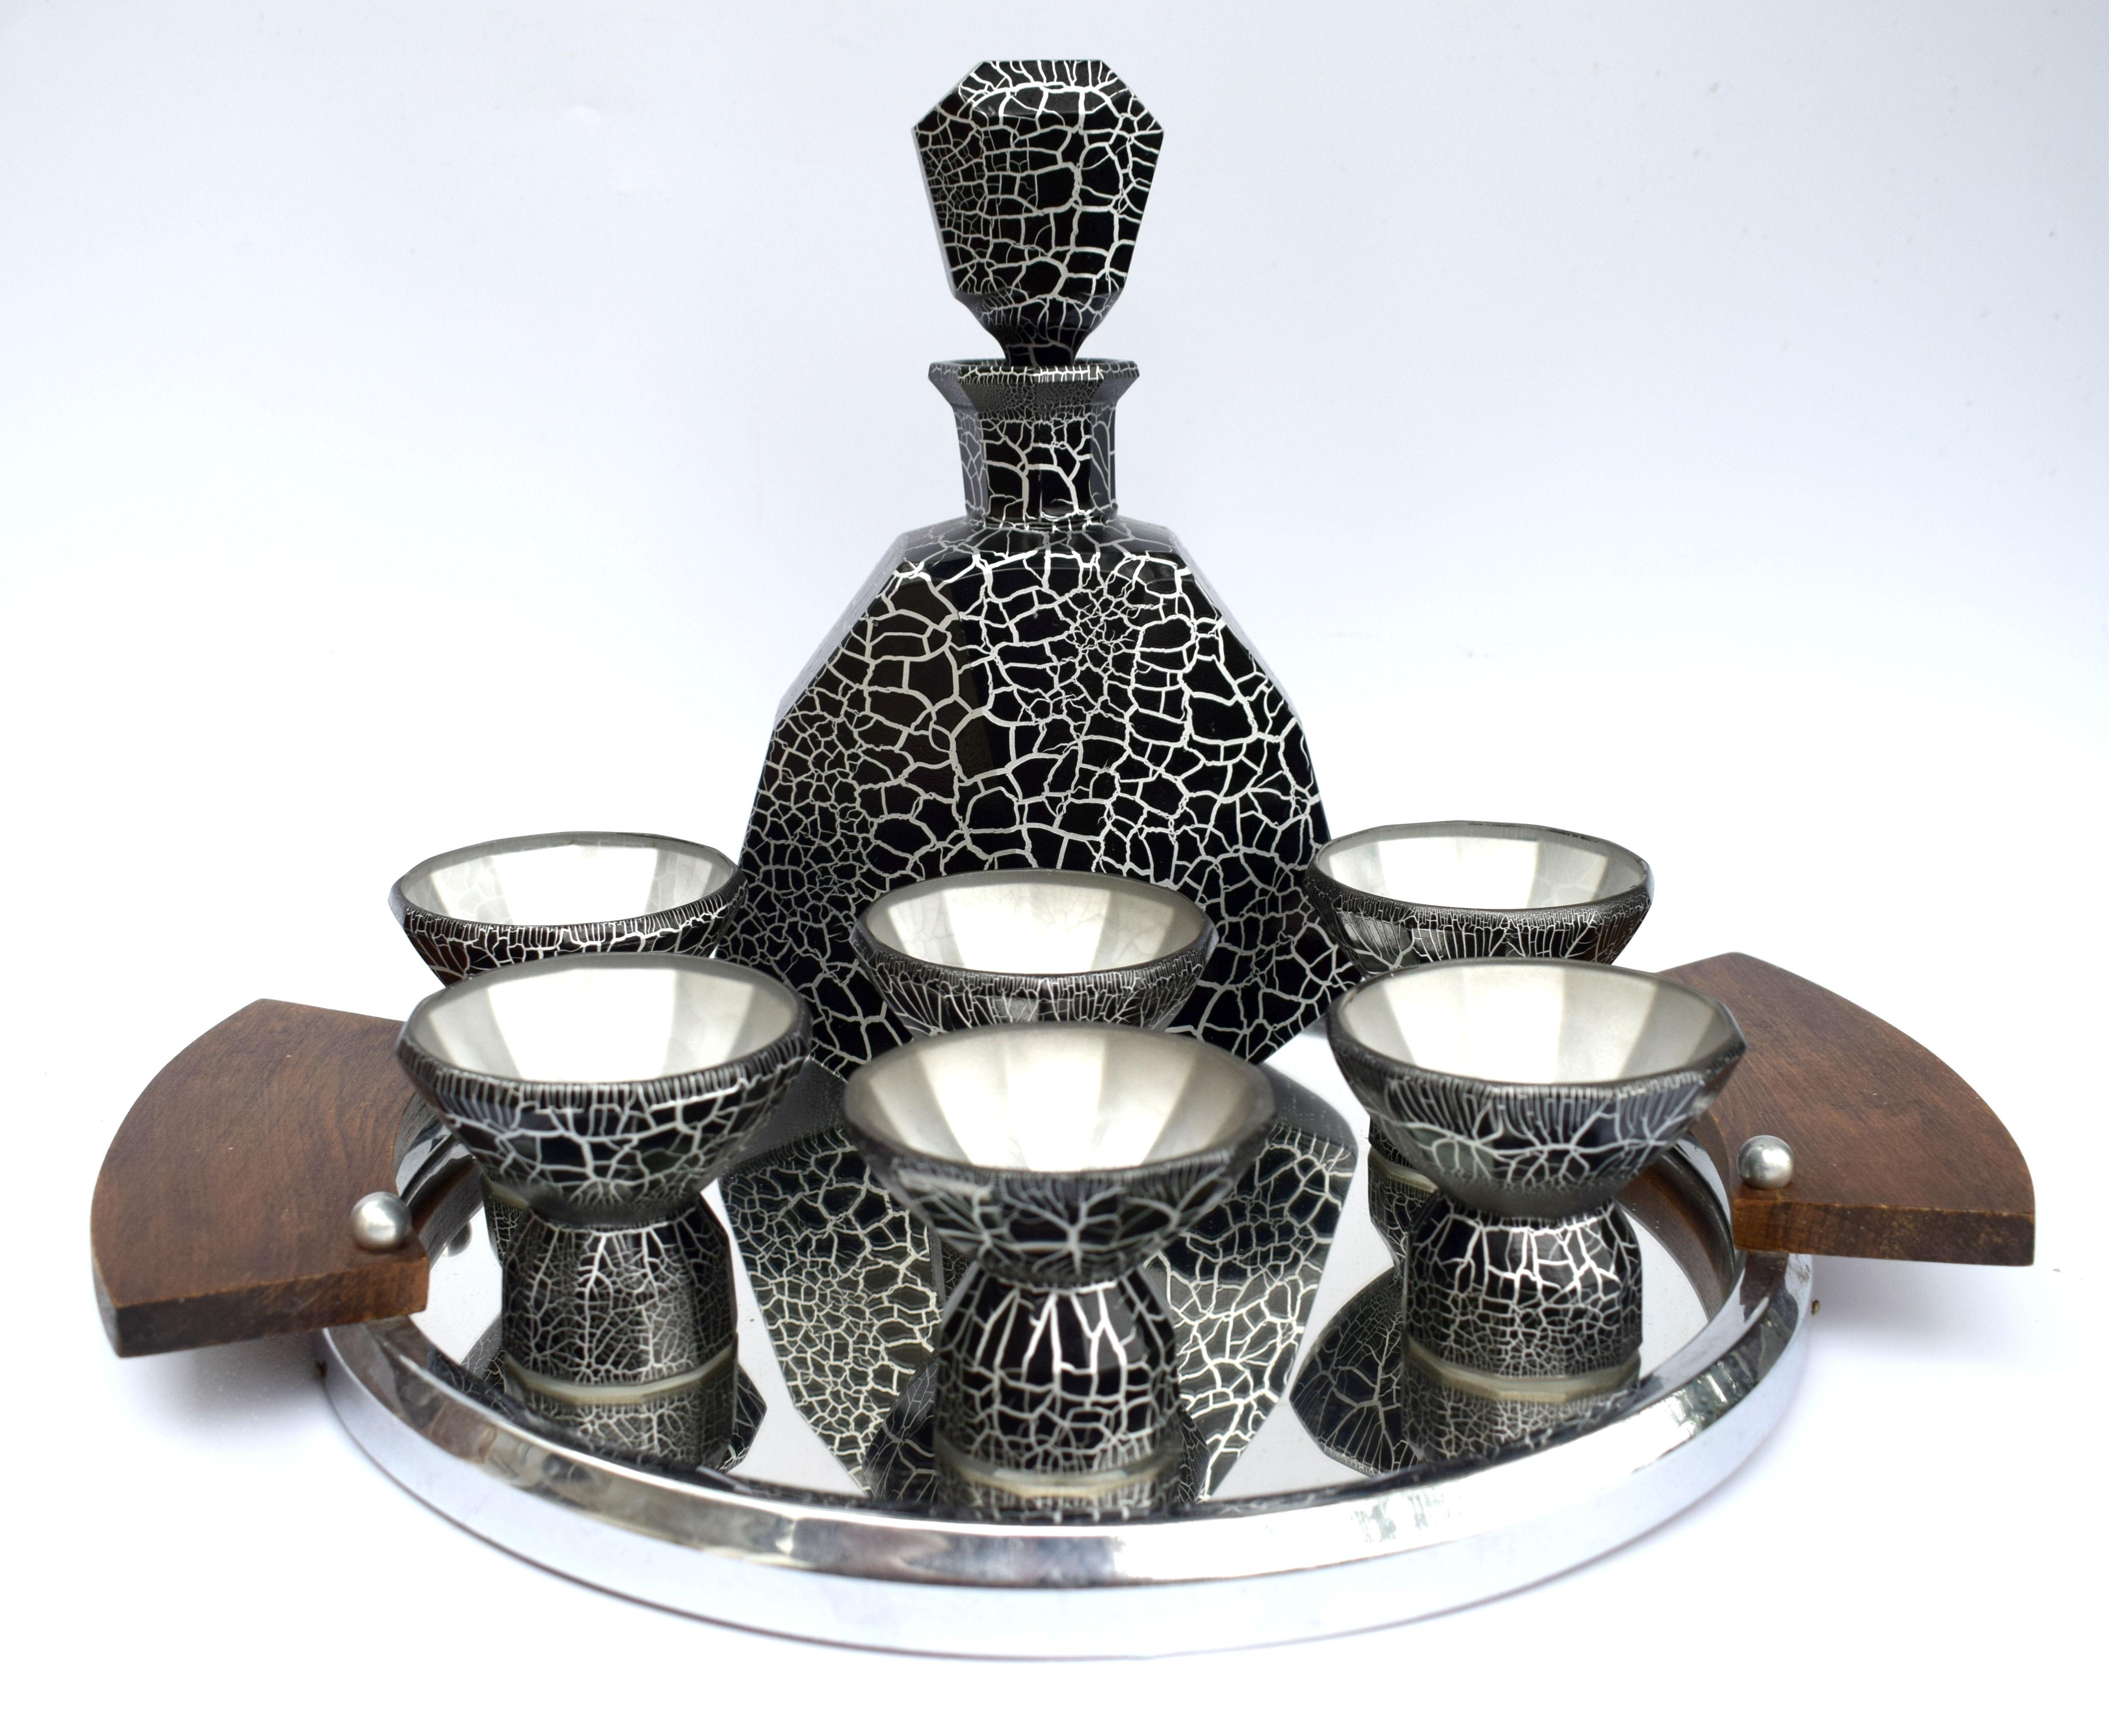 Superbly stylish Art Deco decanter set dating to the late 1920s-1930s made in the Czech Republic. This set features a large impressive decanter with stopper and six matching conical shaped glasses. The whole set is black enameled with silver overlay